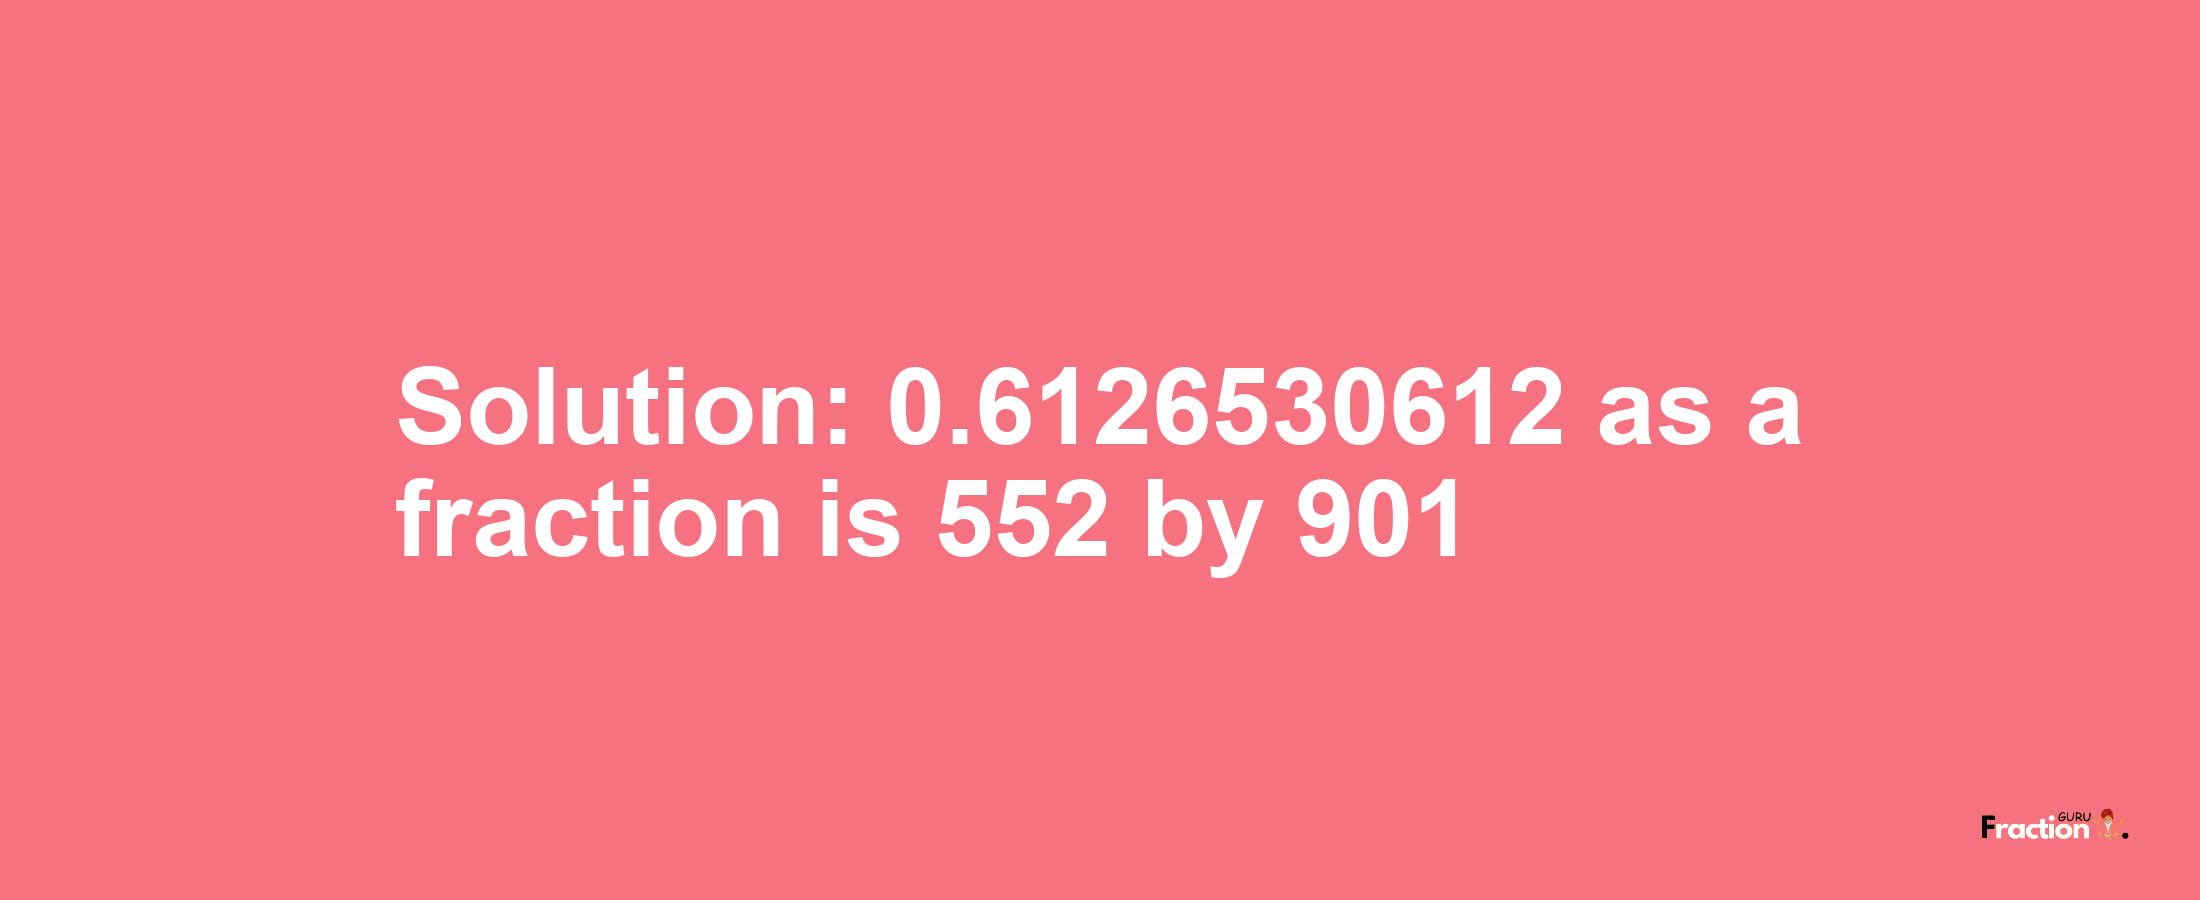 Solution:0.6126530612 as a fraction is 552/901